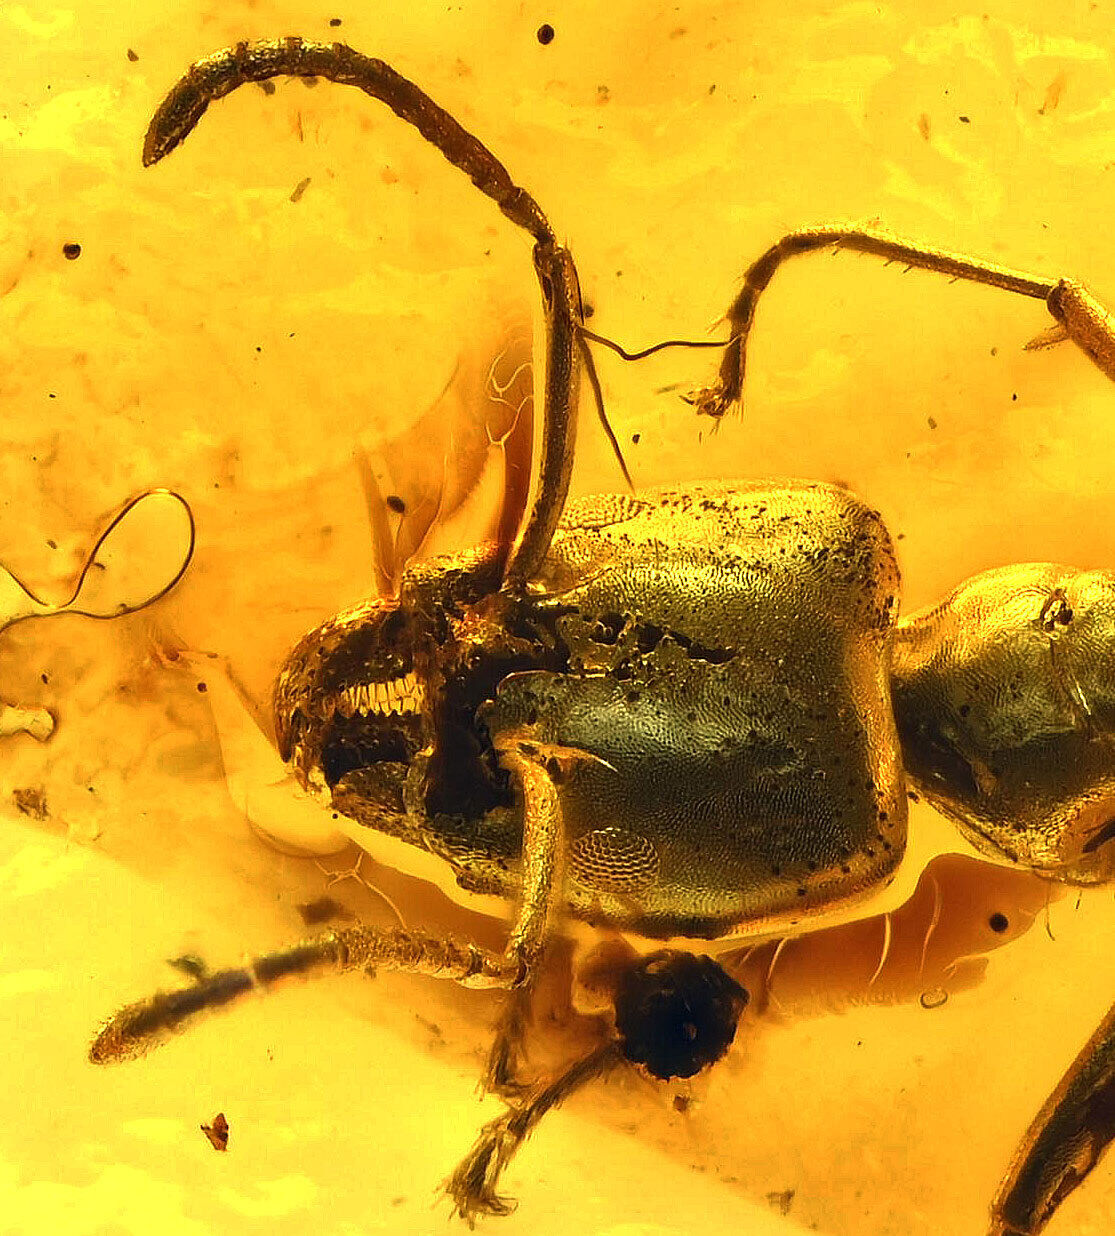 Super Detailed Aculeata, Formicidae (Ant), Fossil Inclusion in Baltic Amber